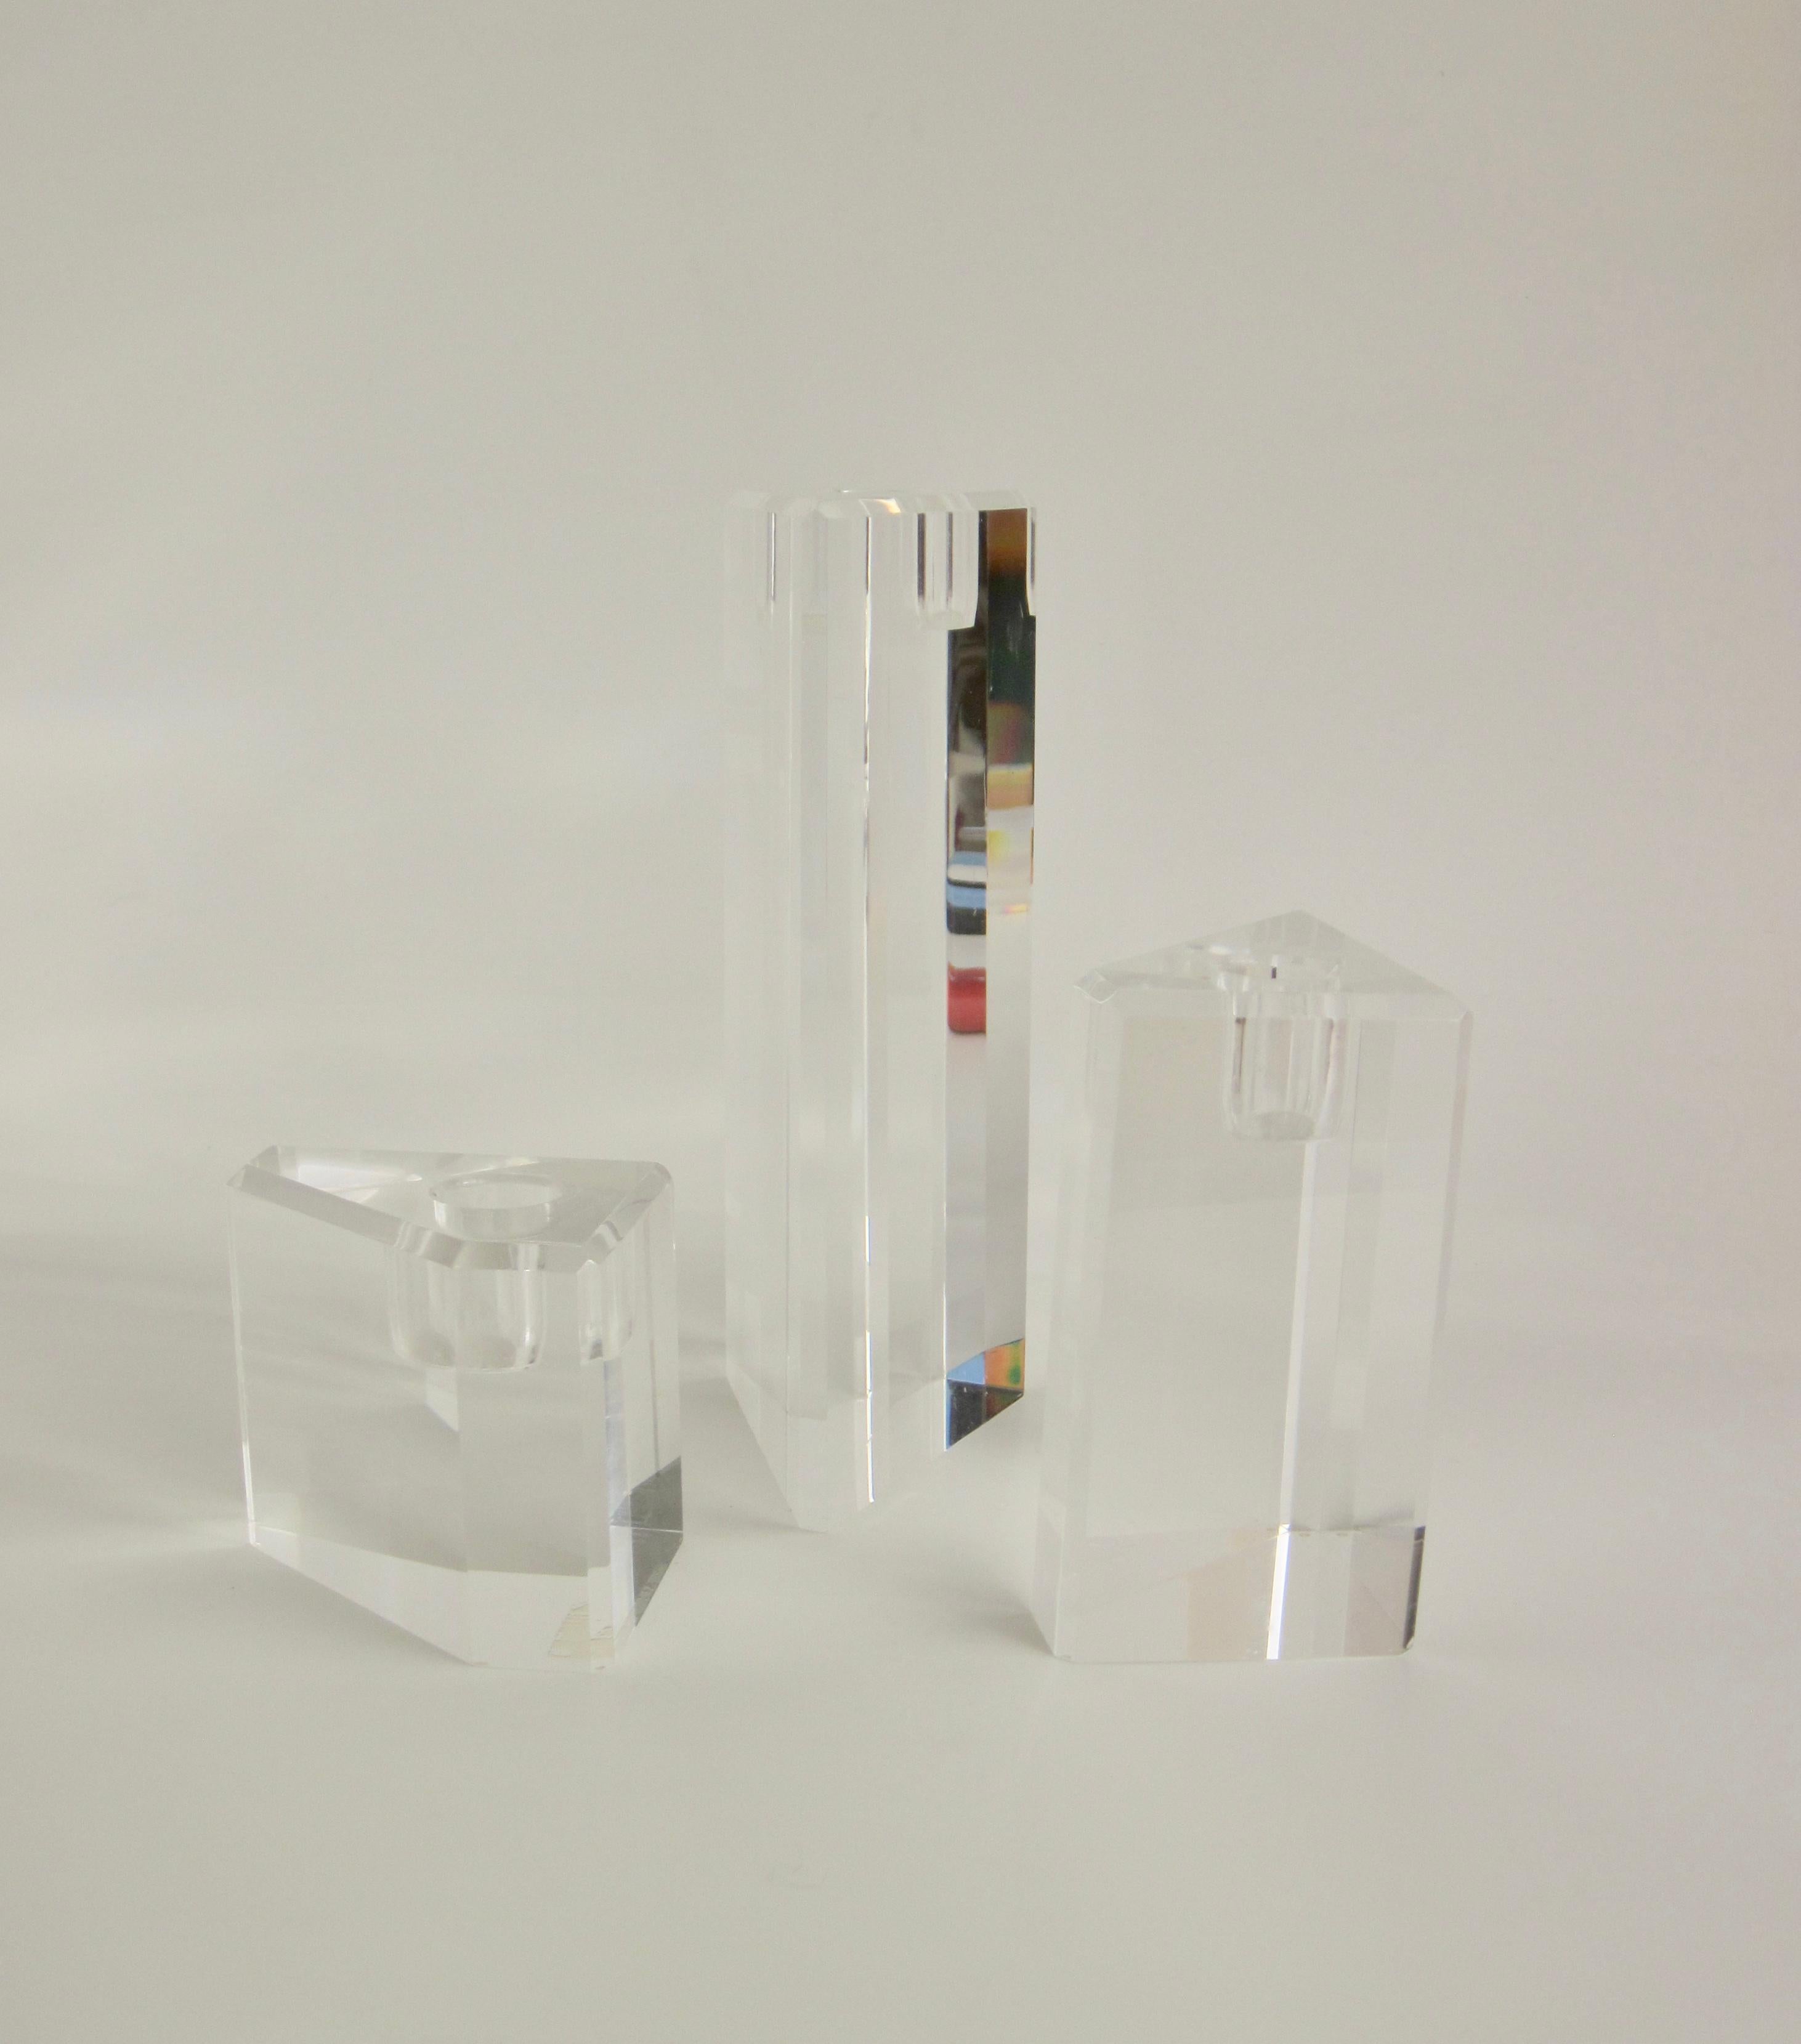 Three lucite candlesticks in graduated height and geometric form. Can be configured in multiple ways.

Medium Form Measurements: 3.88